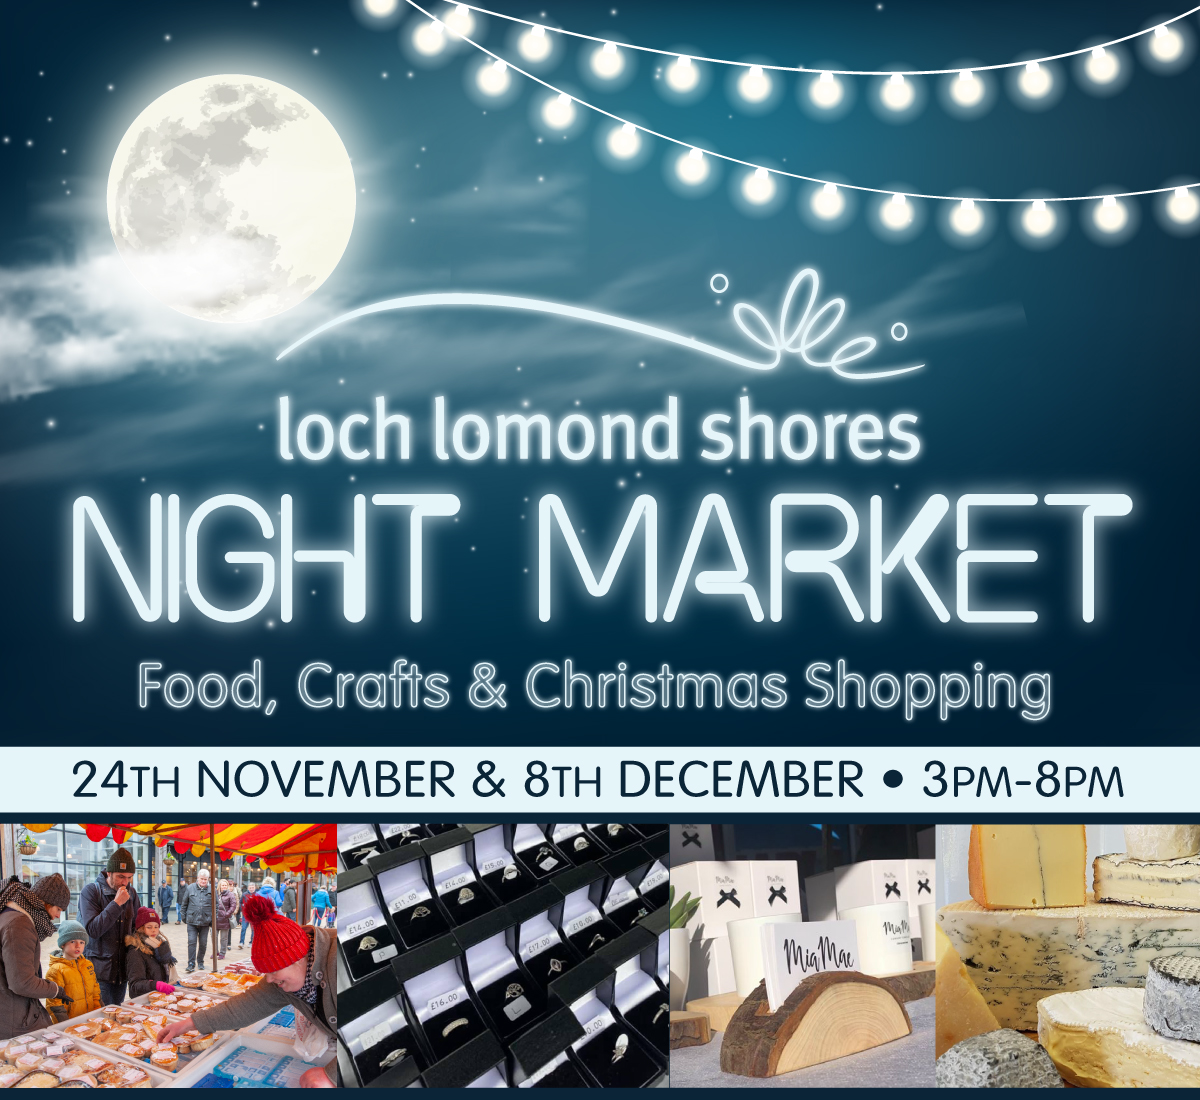 Late night store openings and night markets at Loch Lomond Shores